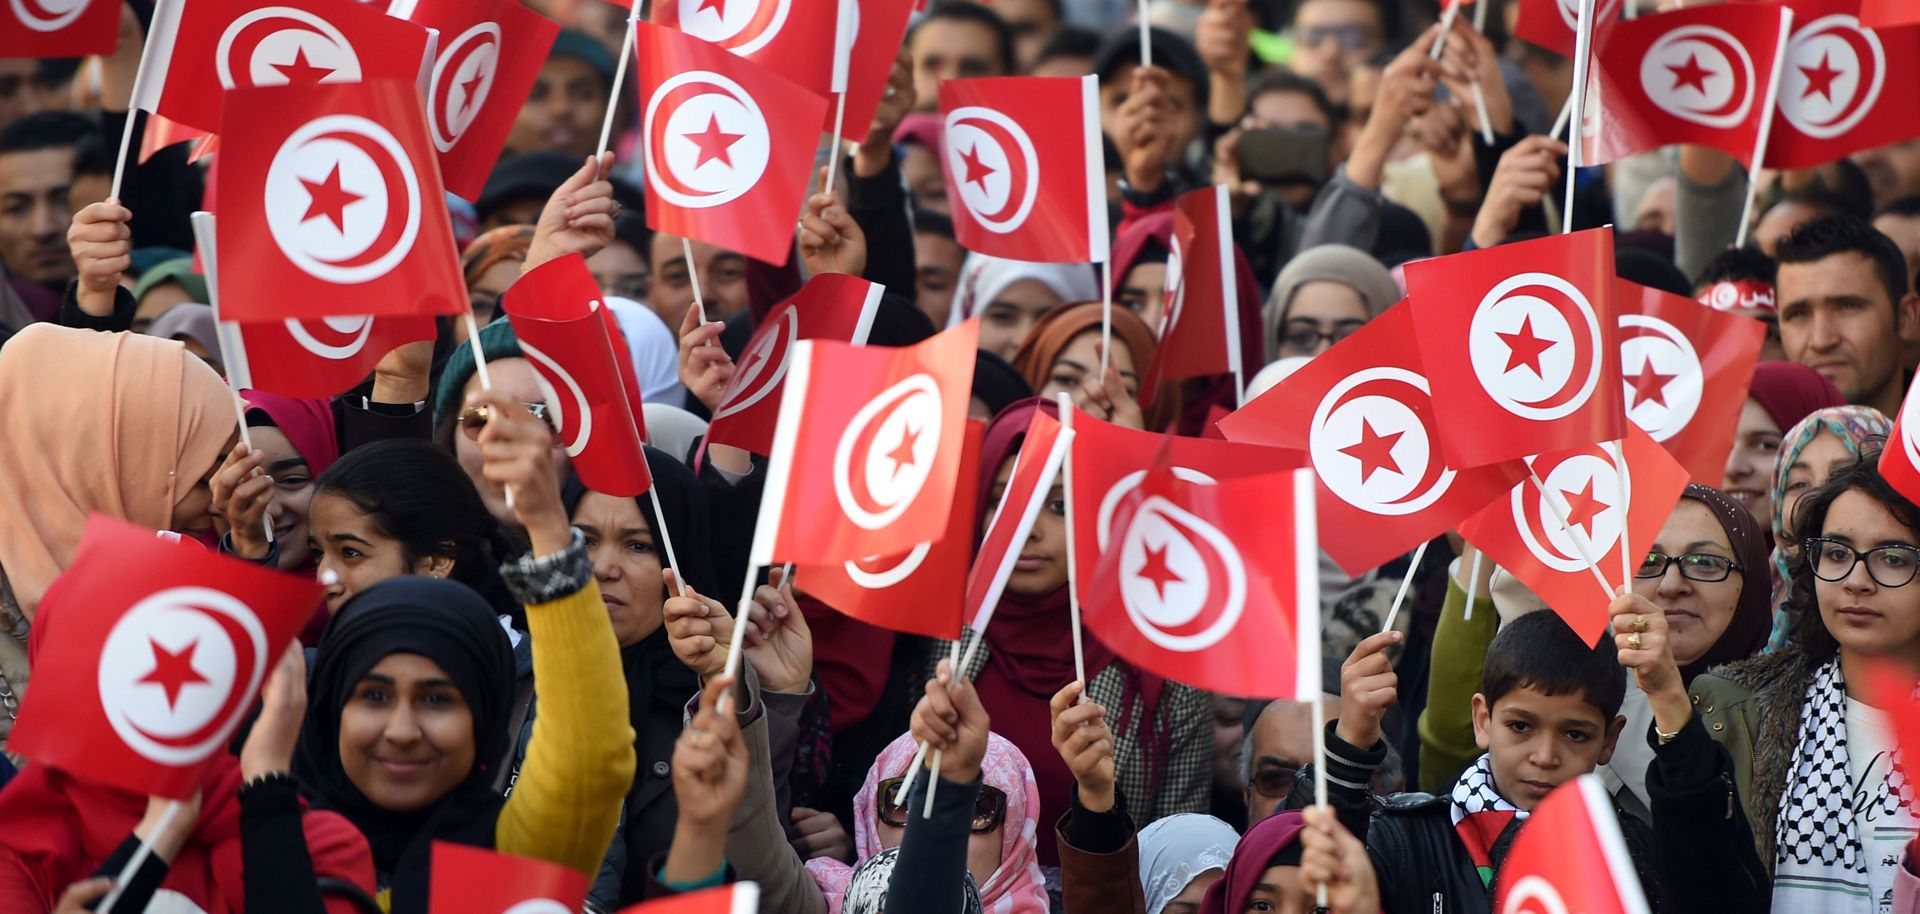 Tunisians gathered at a rally in the capital on Jan. 14 to mark the fifth anniversary of the Arab Spring. Despite the promises of its 2011 Jasmine Revolution, Tunisia's economy has languished.